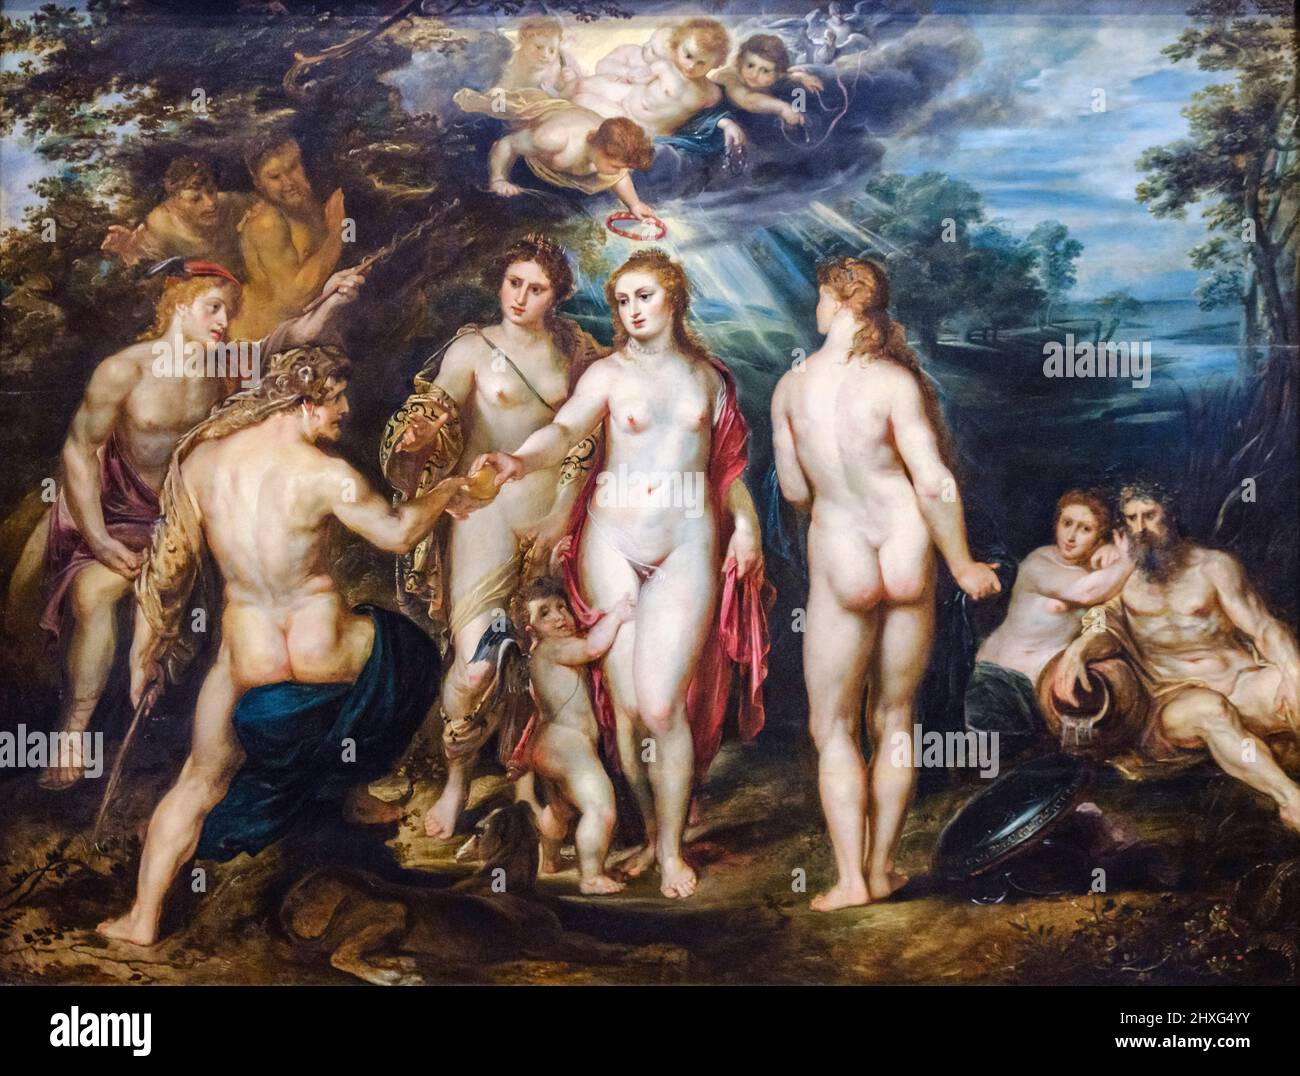 Peter Paul Rubens, the Judgement of paris, about 1597, oil on canvas, National Gallery, London, England, Great Britain. Stock Photo